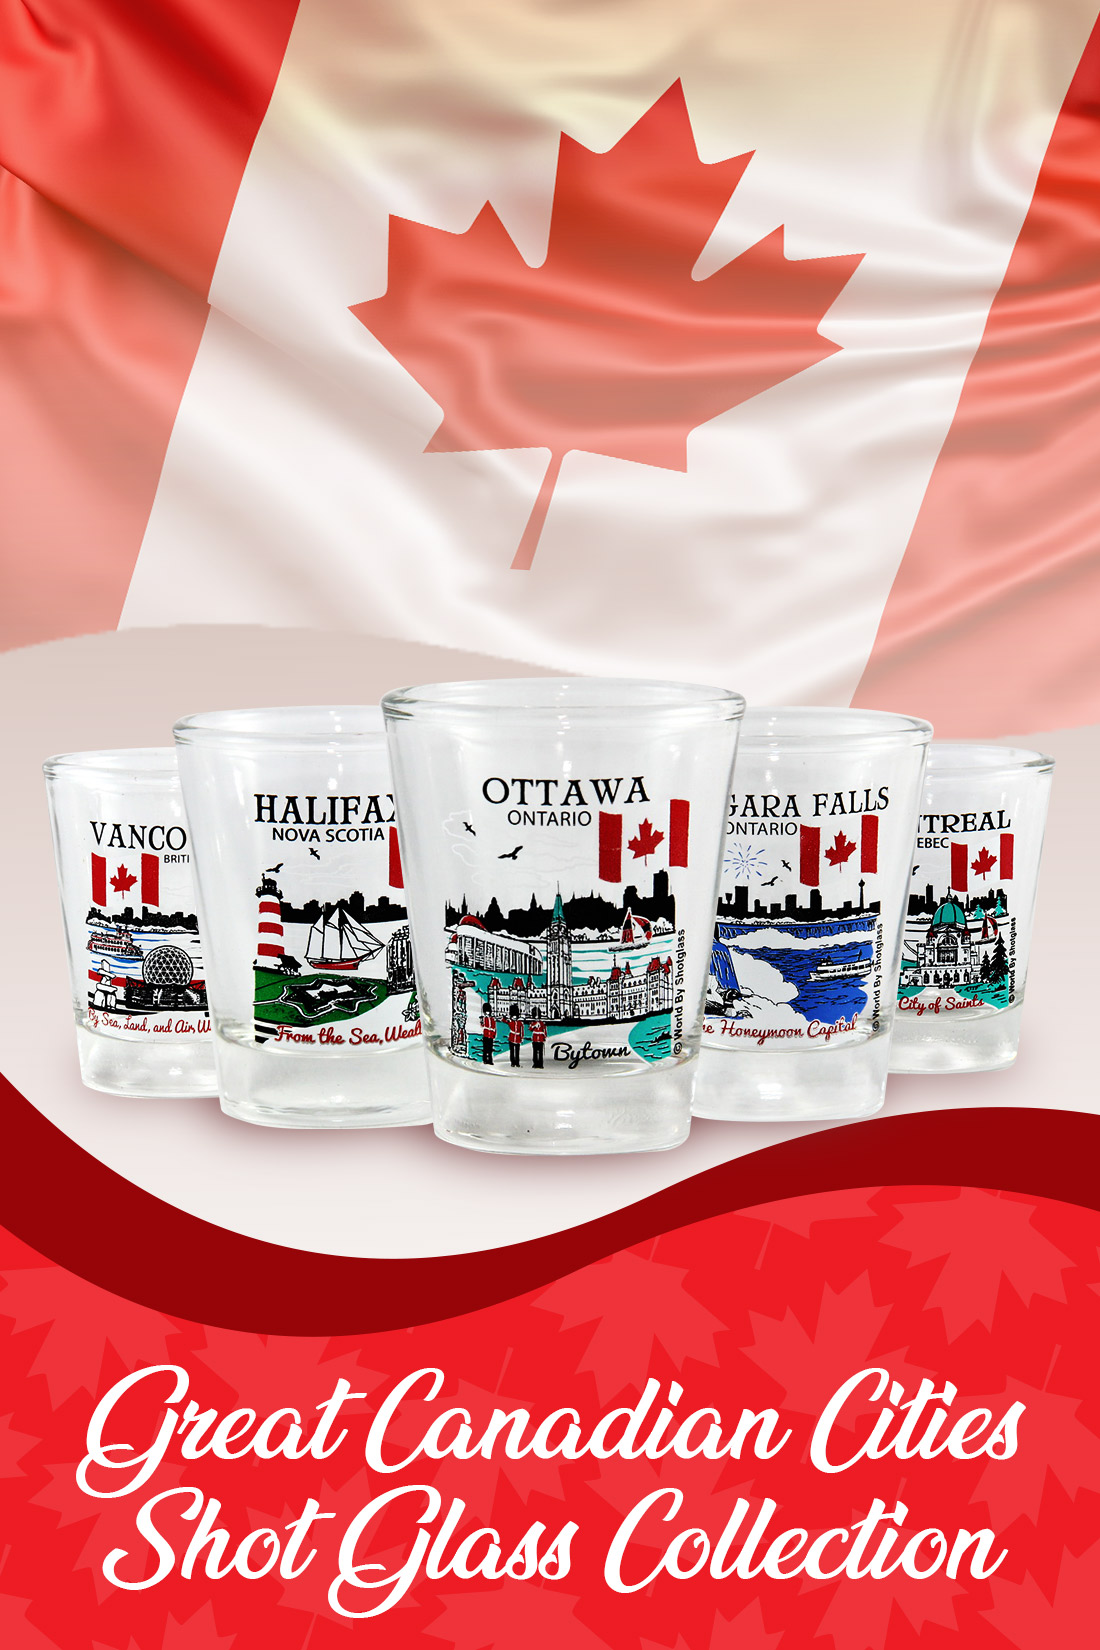 Great Canadian Cities Shot Glass Collection